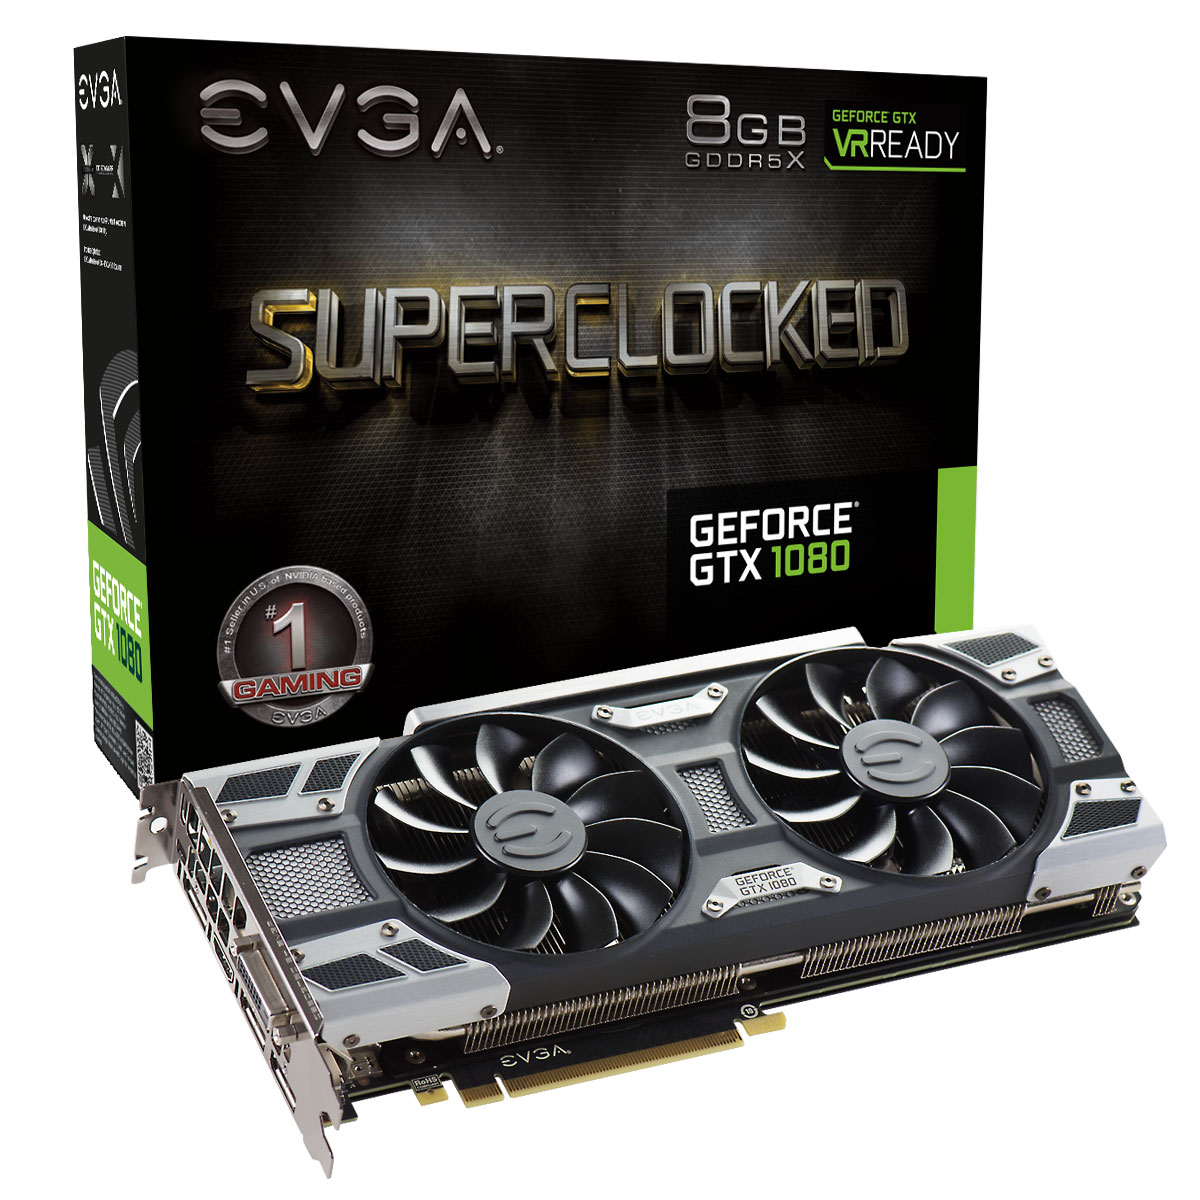 Media asset in full size related to 3dfxzone.it news item entitled as follows: EVGA annuncia cinque video card GeForce GTX 1080, reference e non | Image Name: news24333_EVGA-GeForce-GTX-1080-SC-GAMING-ACX-3_1.jpg